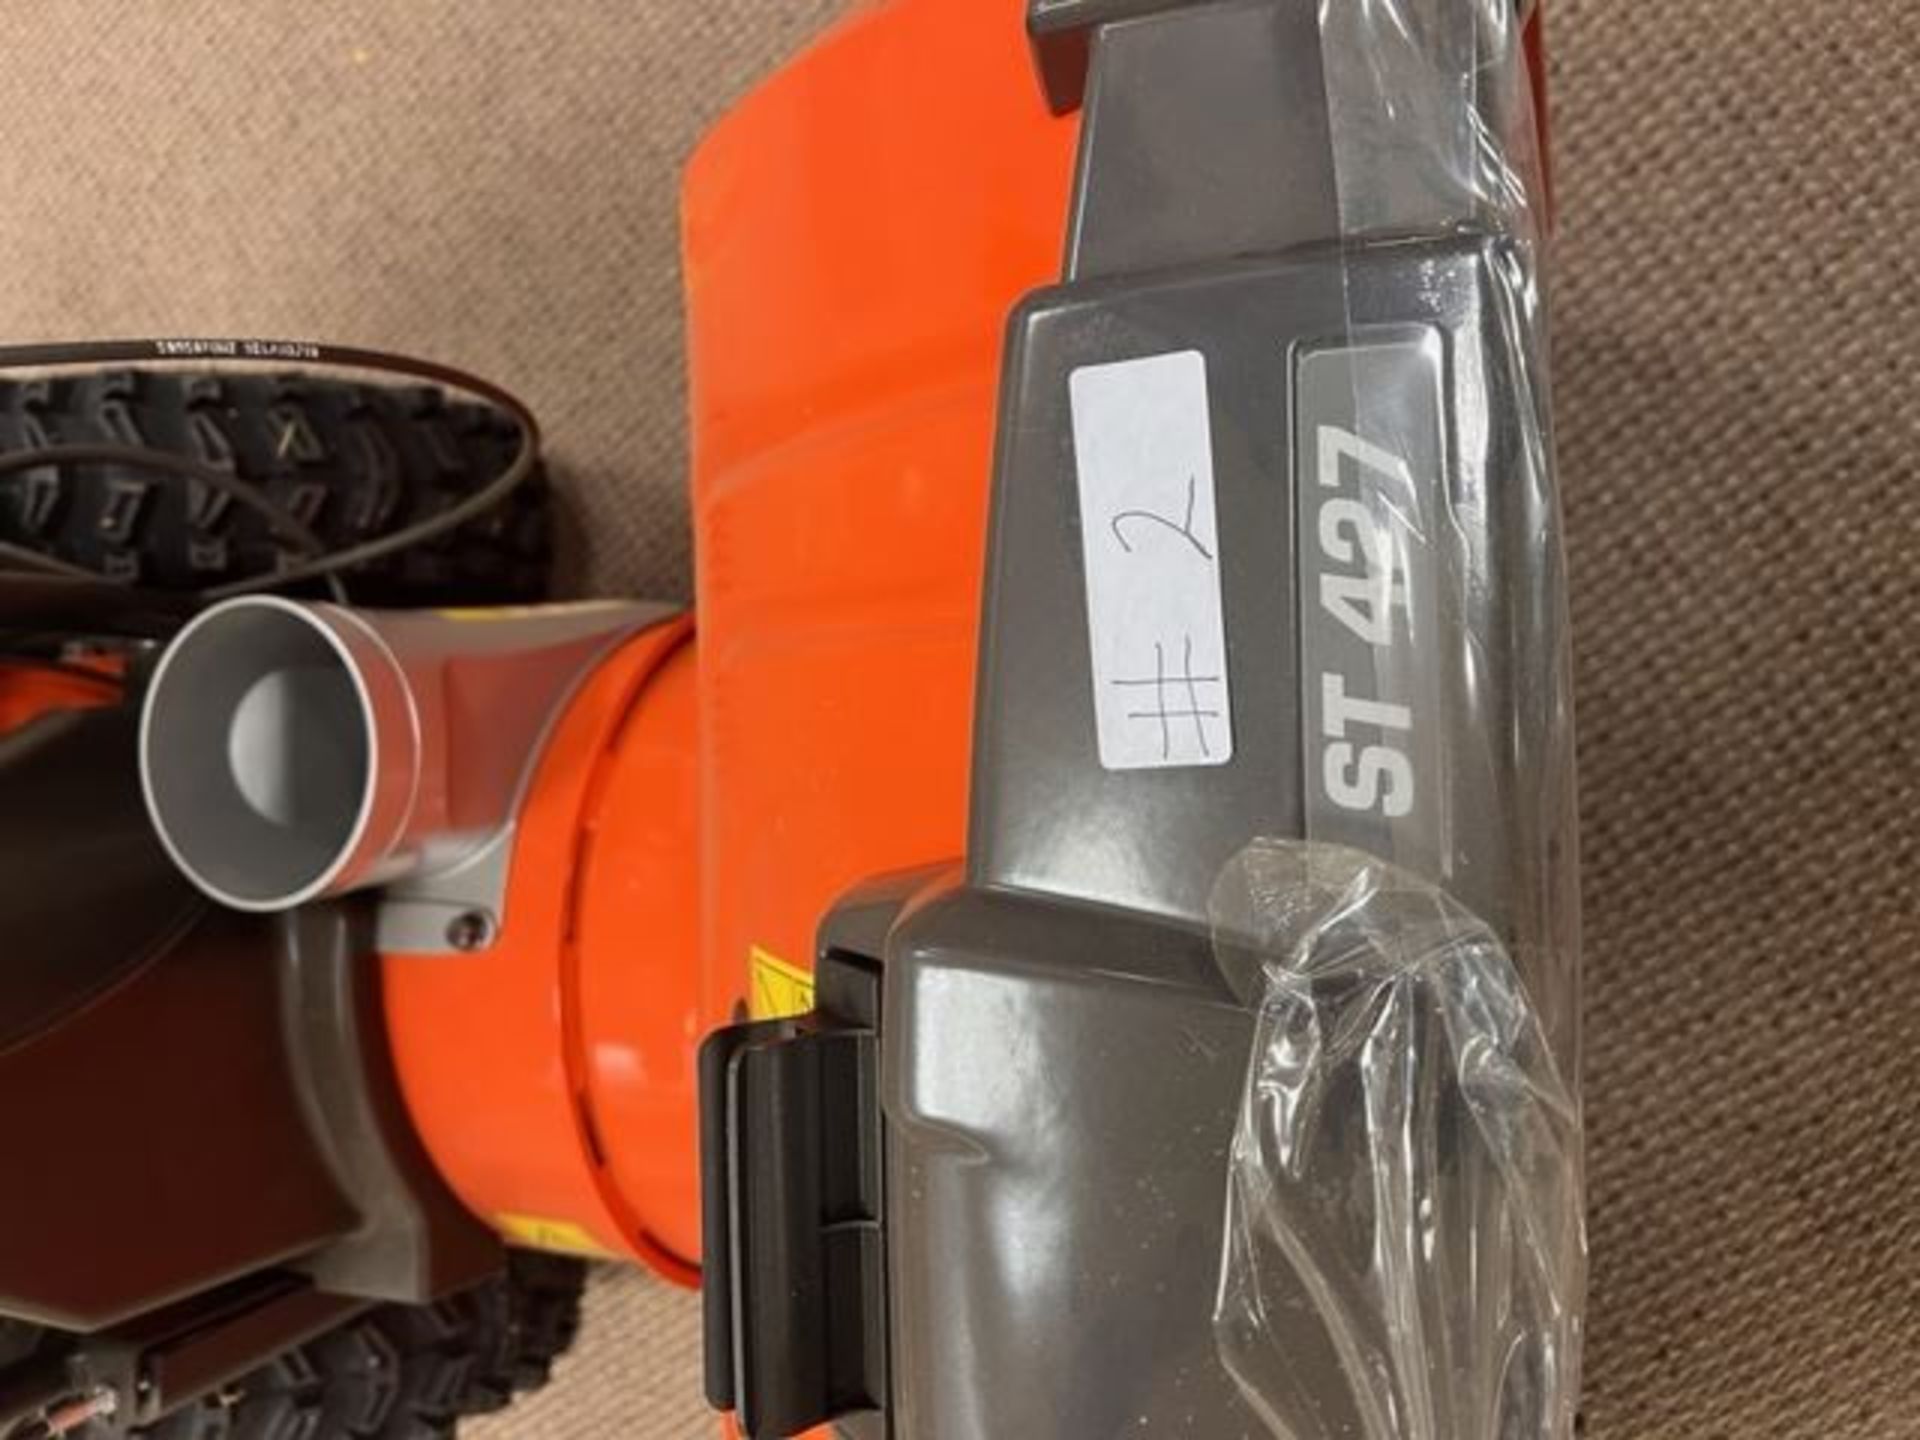 Husqvarna ST 427 Self Propelled Snow Blower - Approx. MSRP $2399 - Image 4 of 5